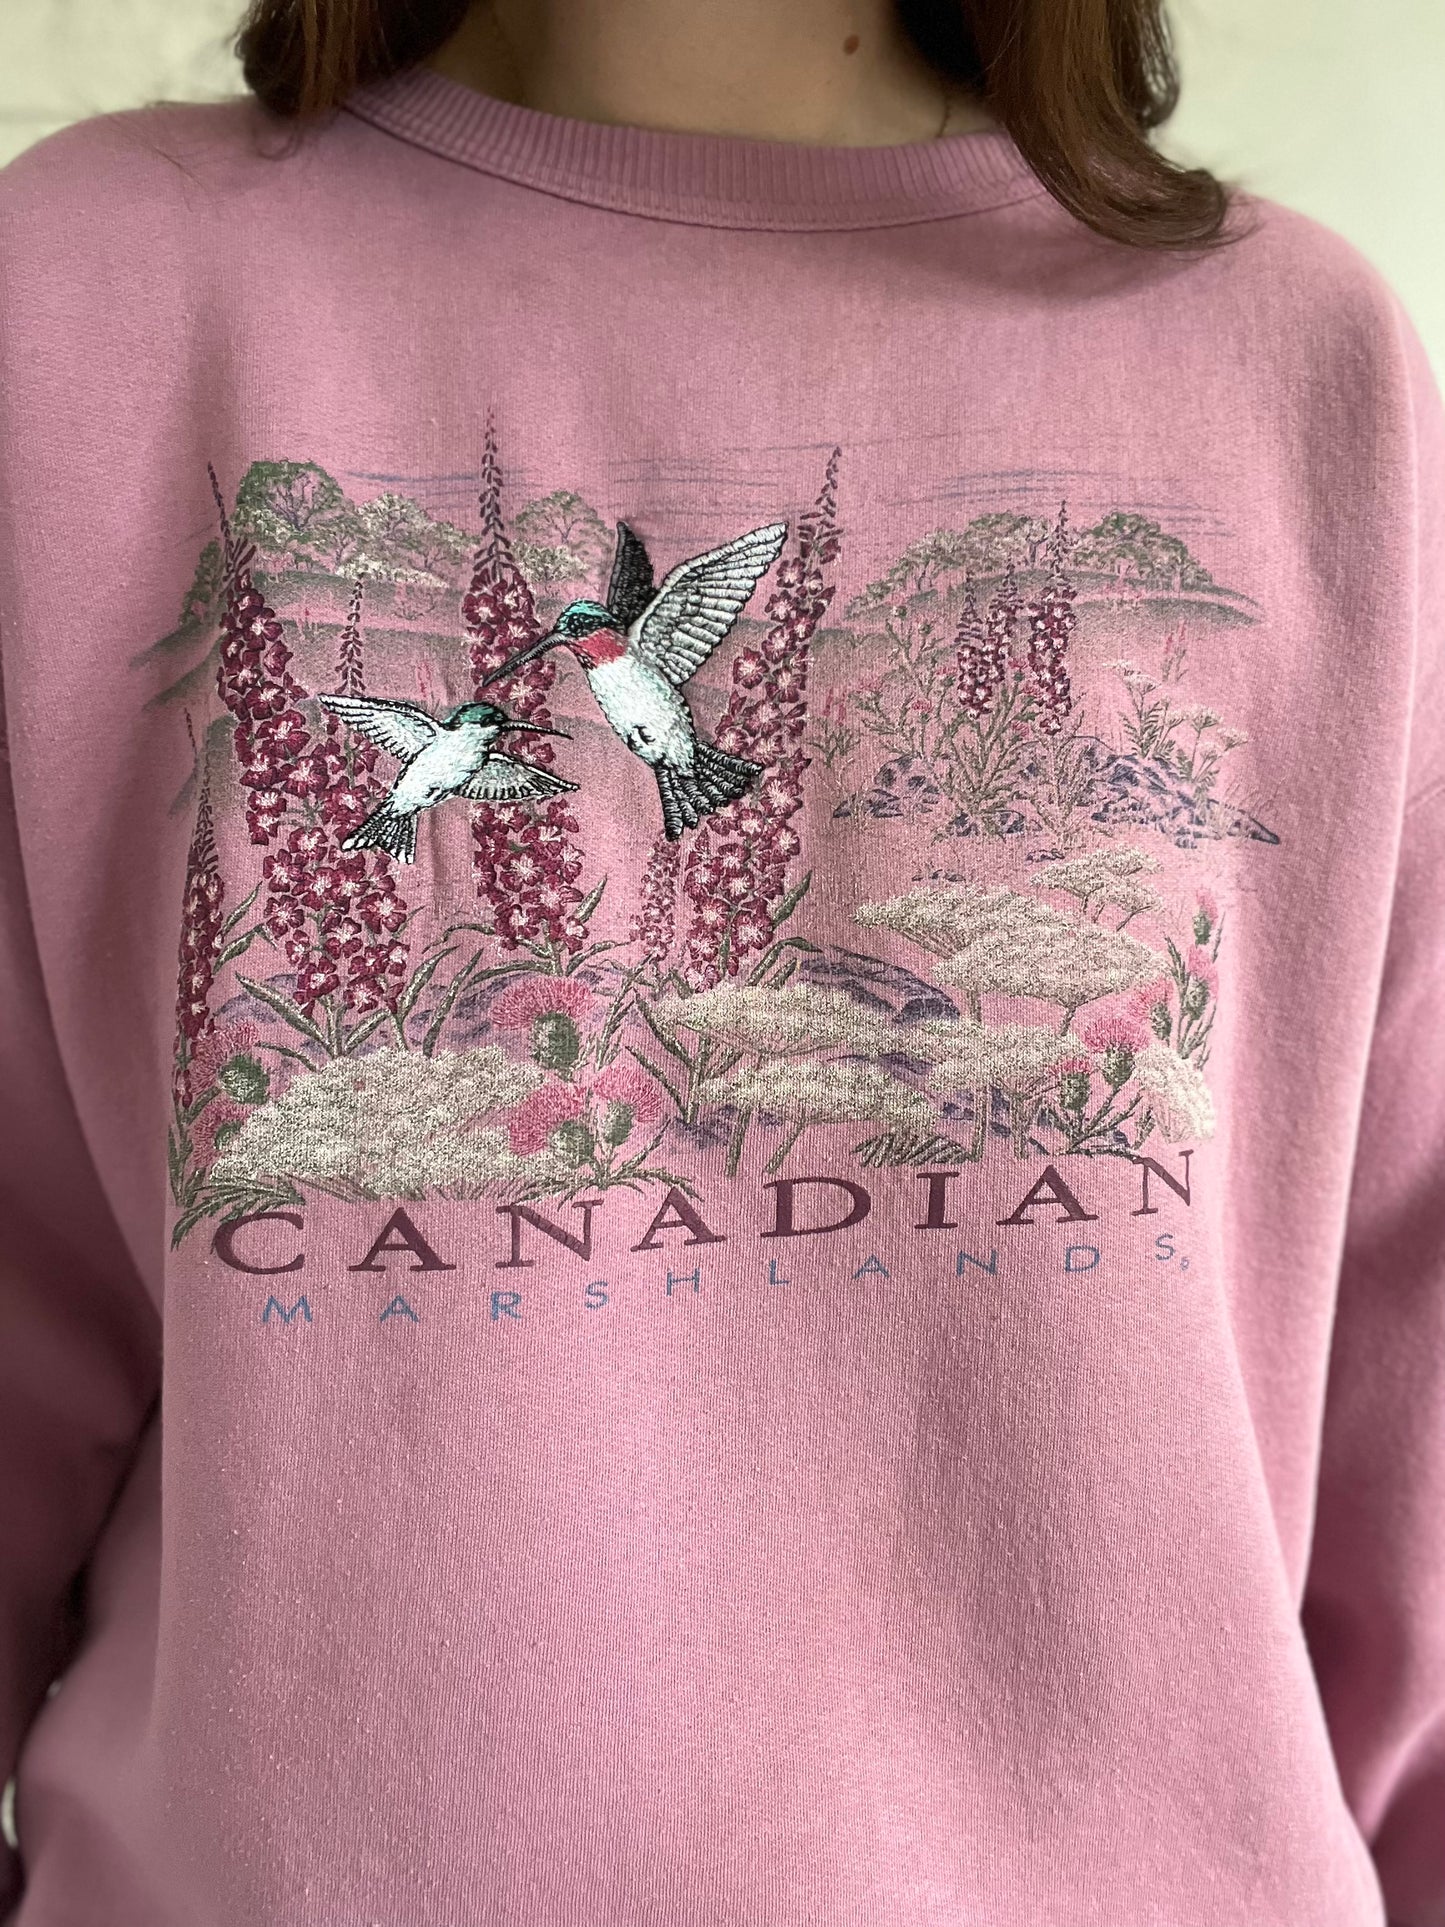 Canadian Marshlands Embroidery Sweater - XL/XXL